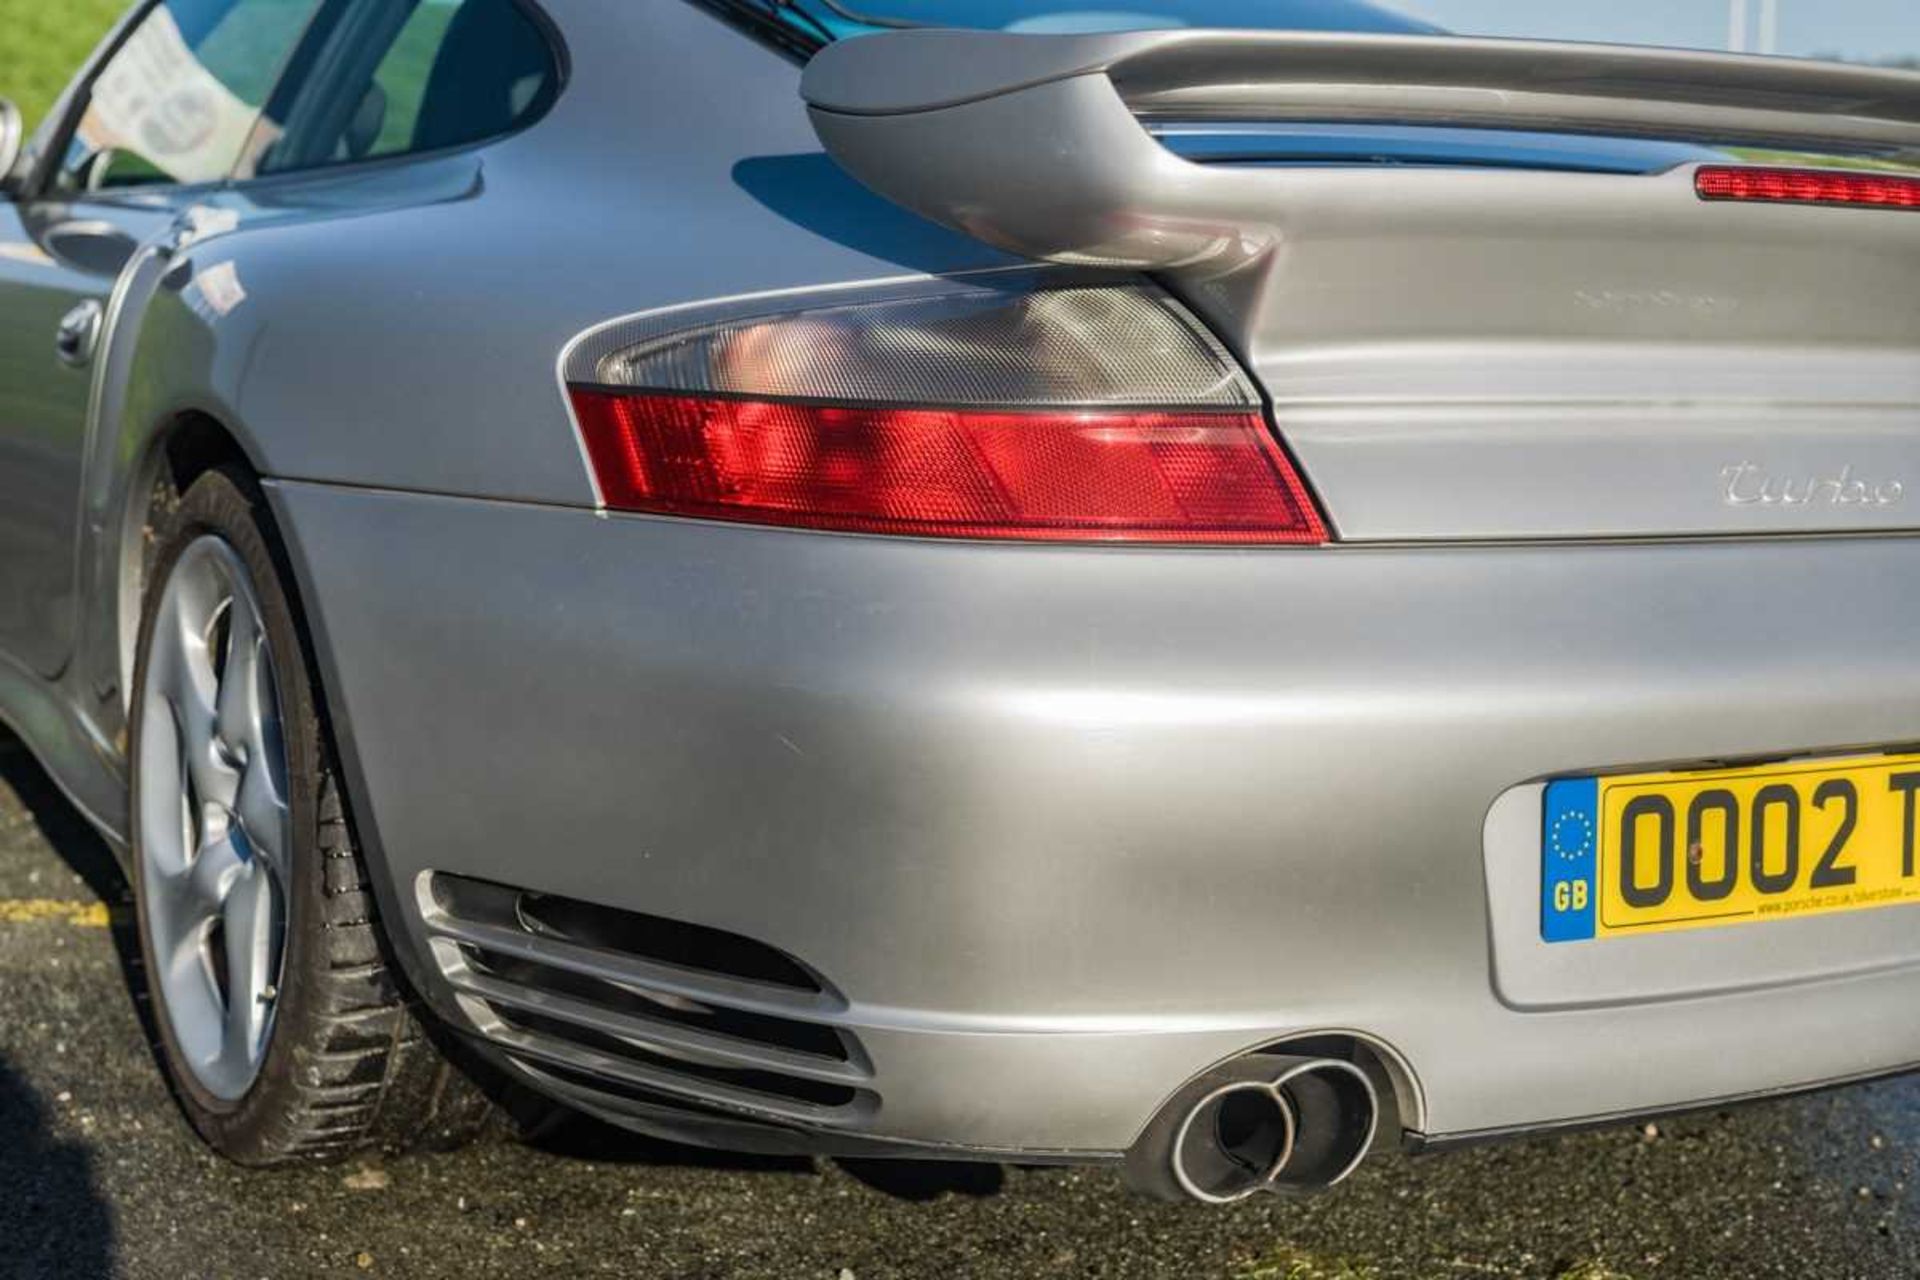 2002 Porsche 911 Turbo Specified with factory Aero-kit, sunroof and manual transmission  - Image 18 of 58